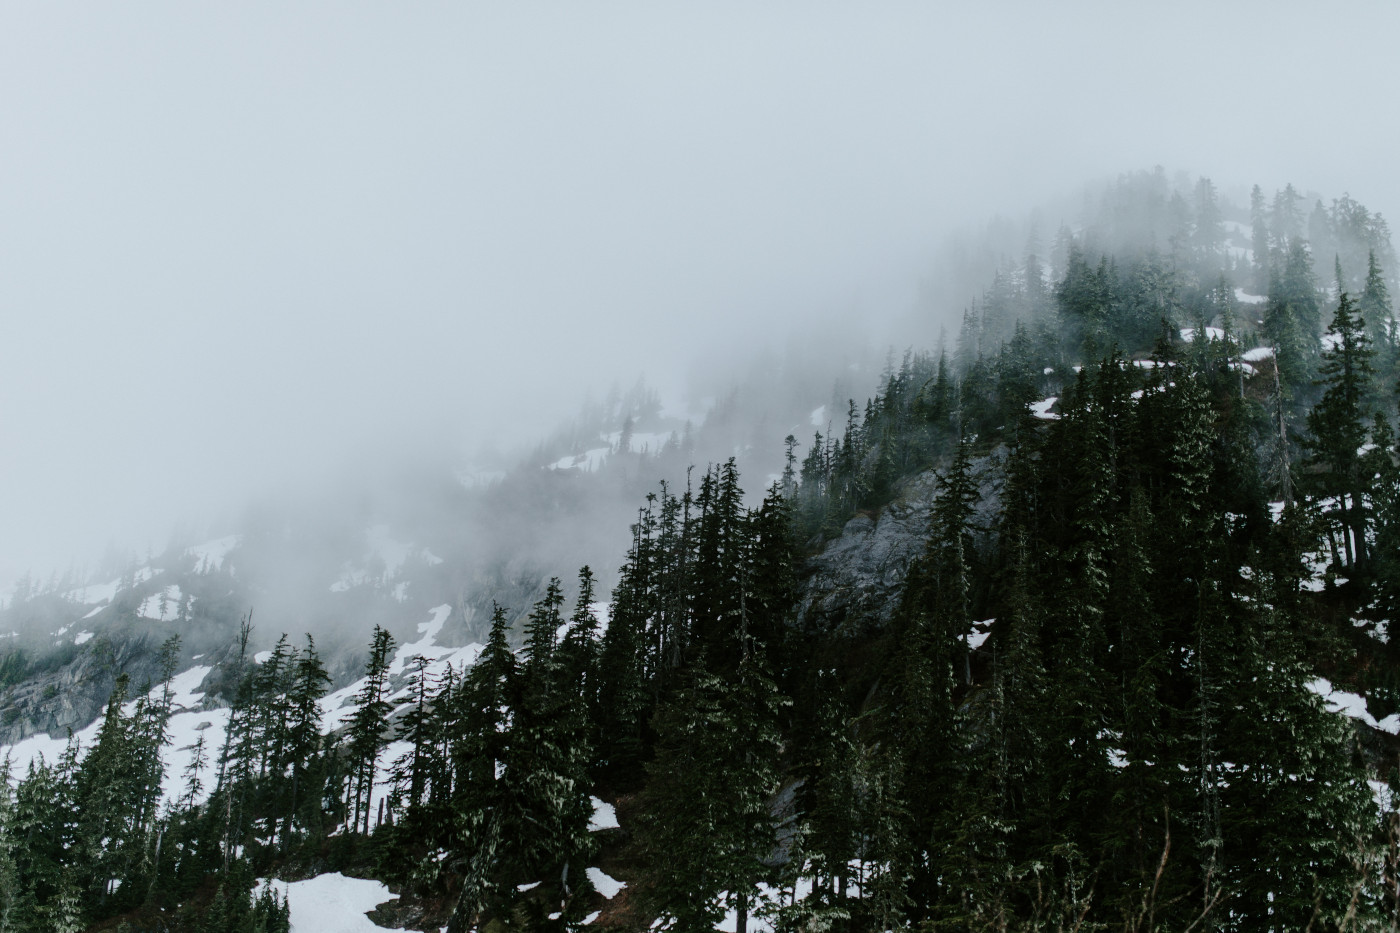 A view of the snow covered trees. Elopement photography at North Cascades National Park by Sienna Plus Josh.